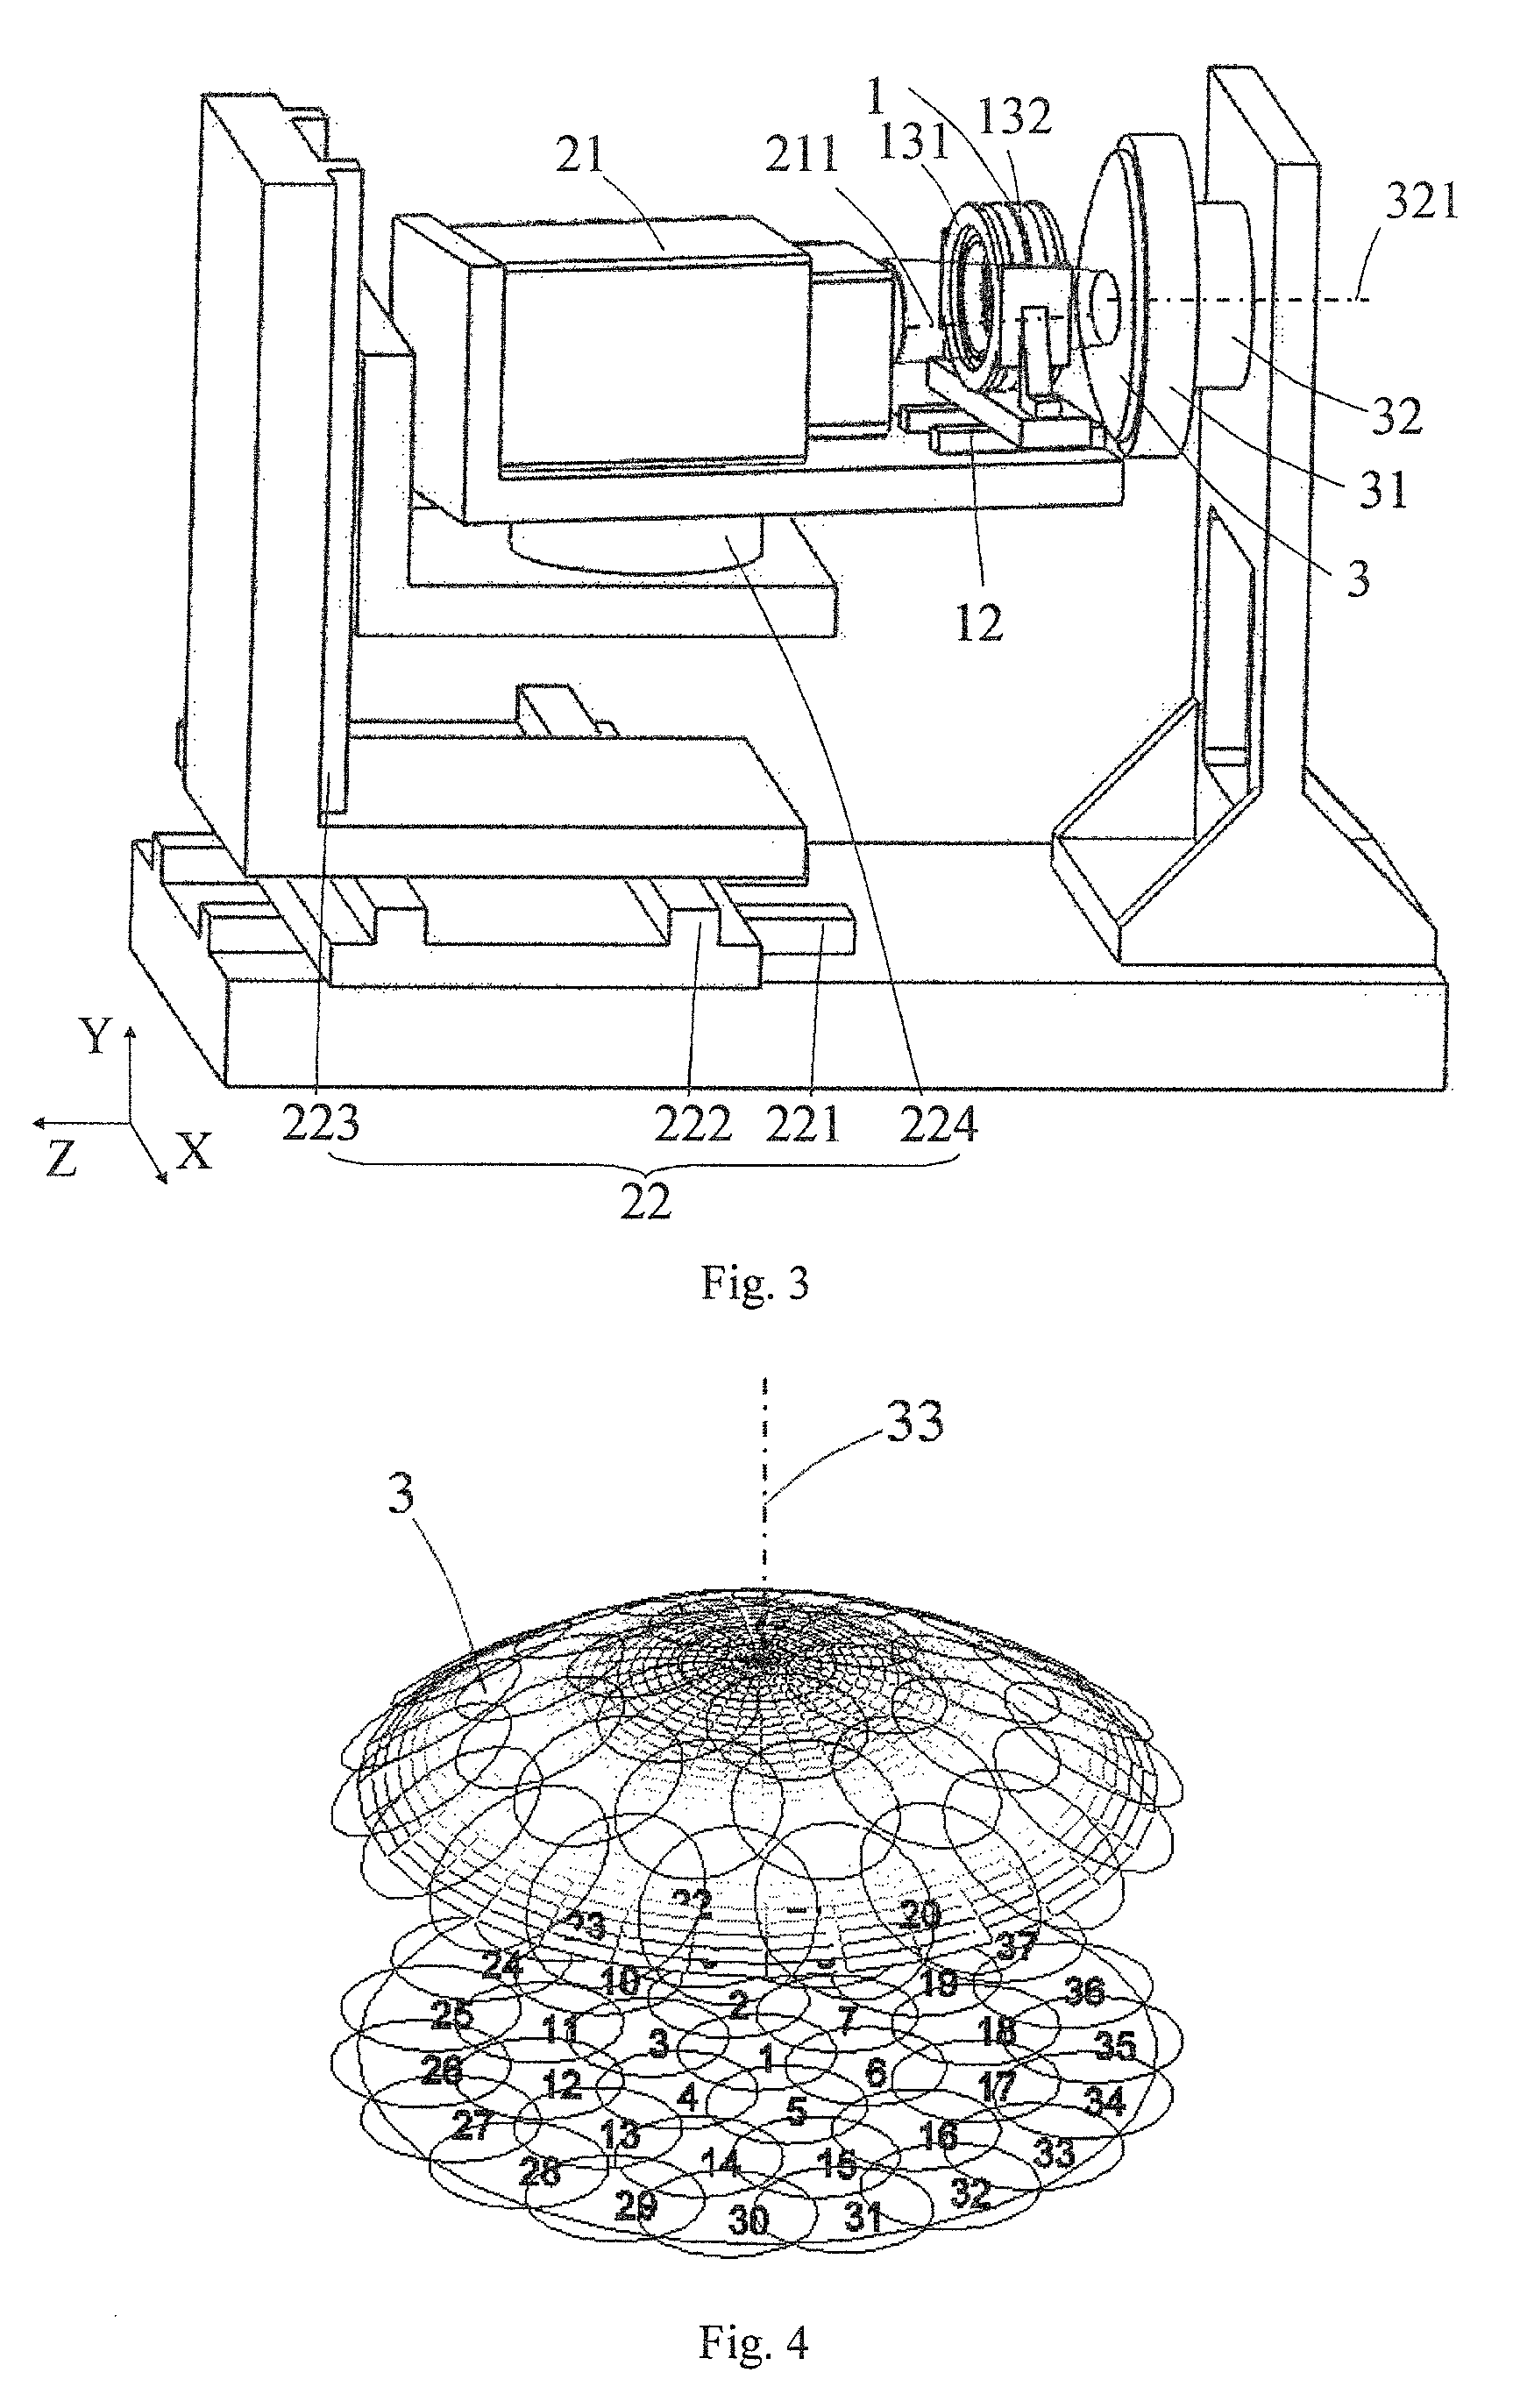 Near-null compensator and figure metrology apparatus for measuring aspheric surfaces by subaperture stitching and measuring method thereof